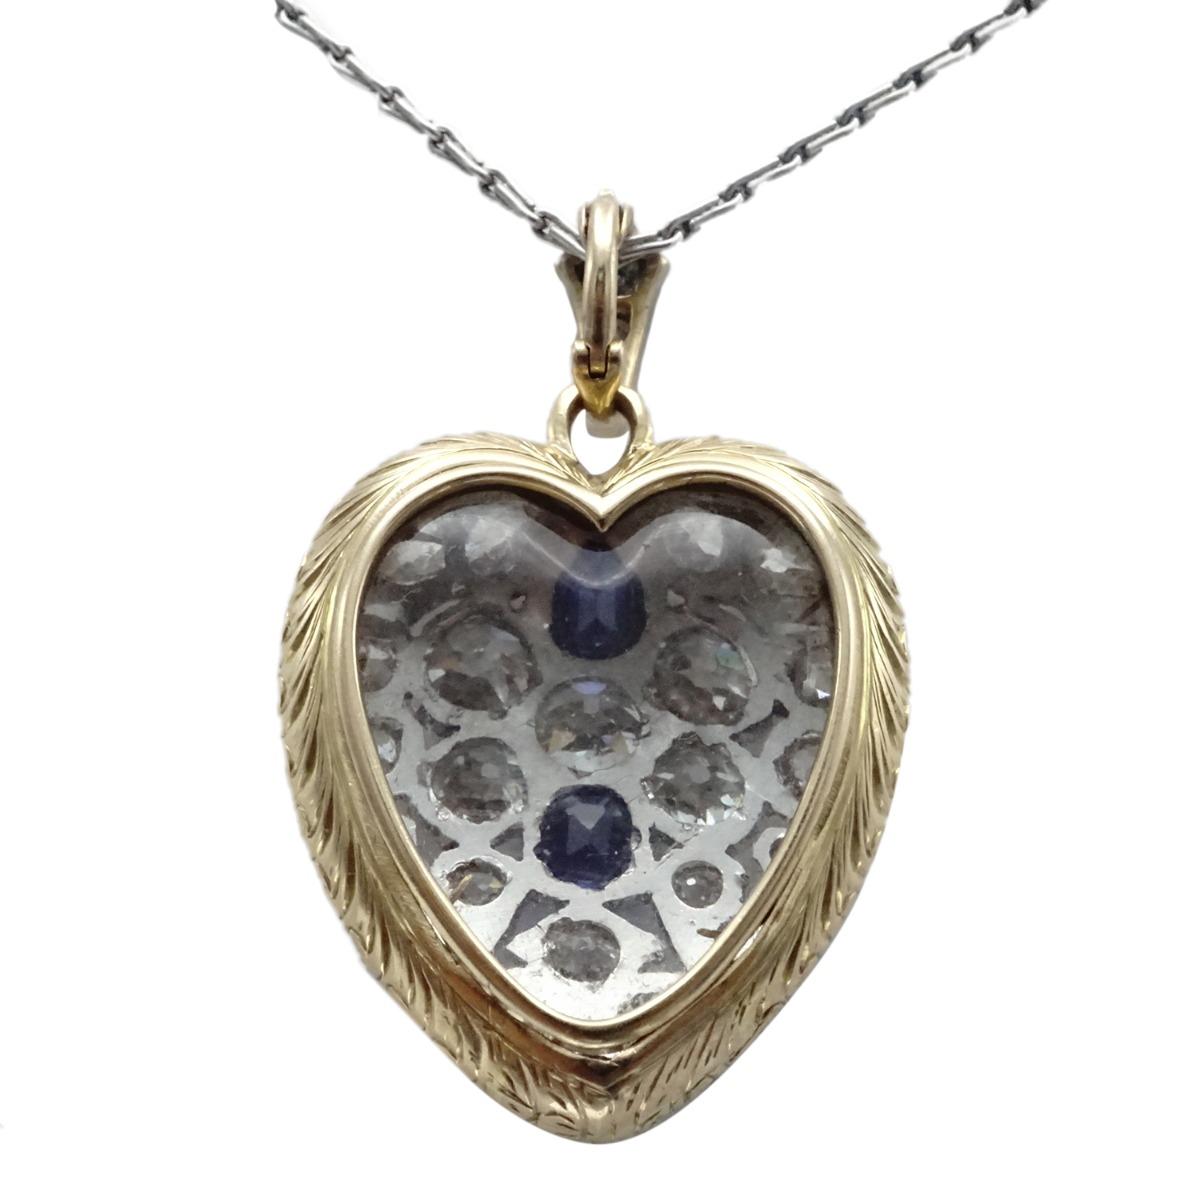 Crafted in platinum and 18 karat yellow gold this locket features old european cuts and 2 cushion cut beautiful sapphires.  Locket dimensions length 1 1/2